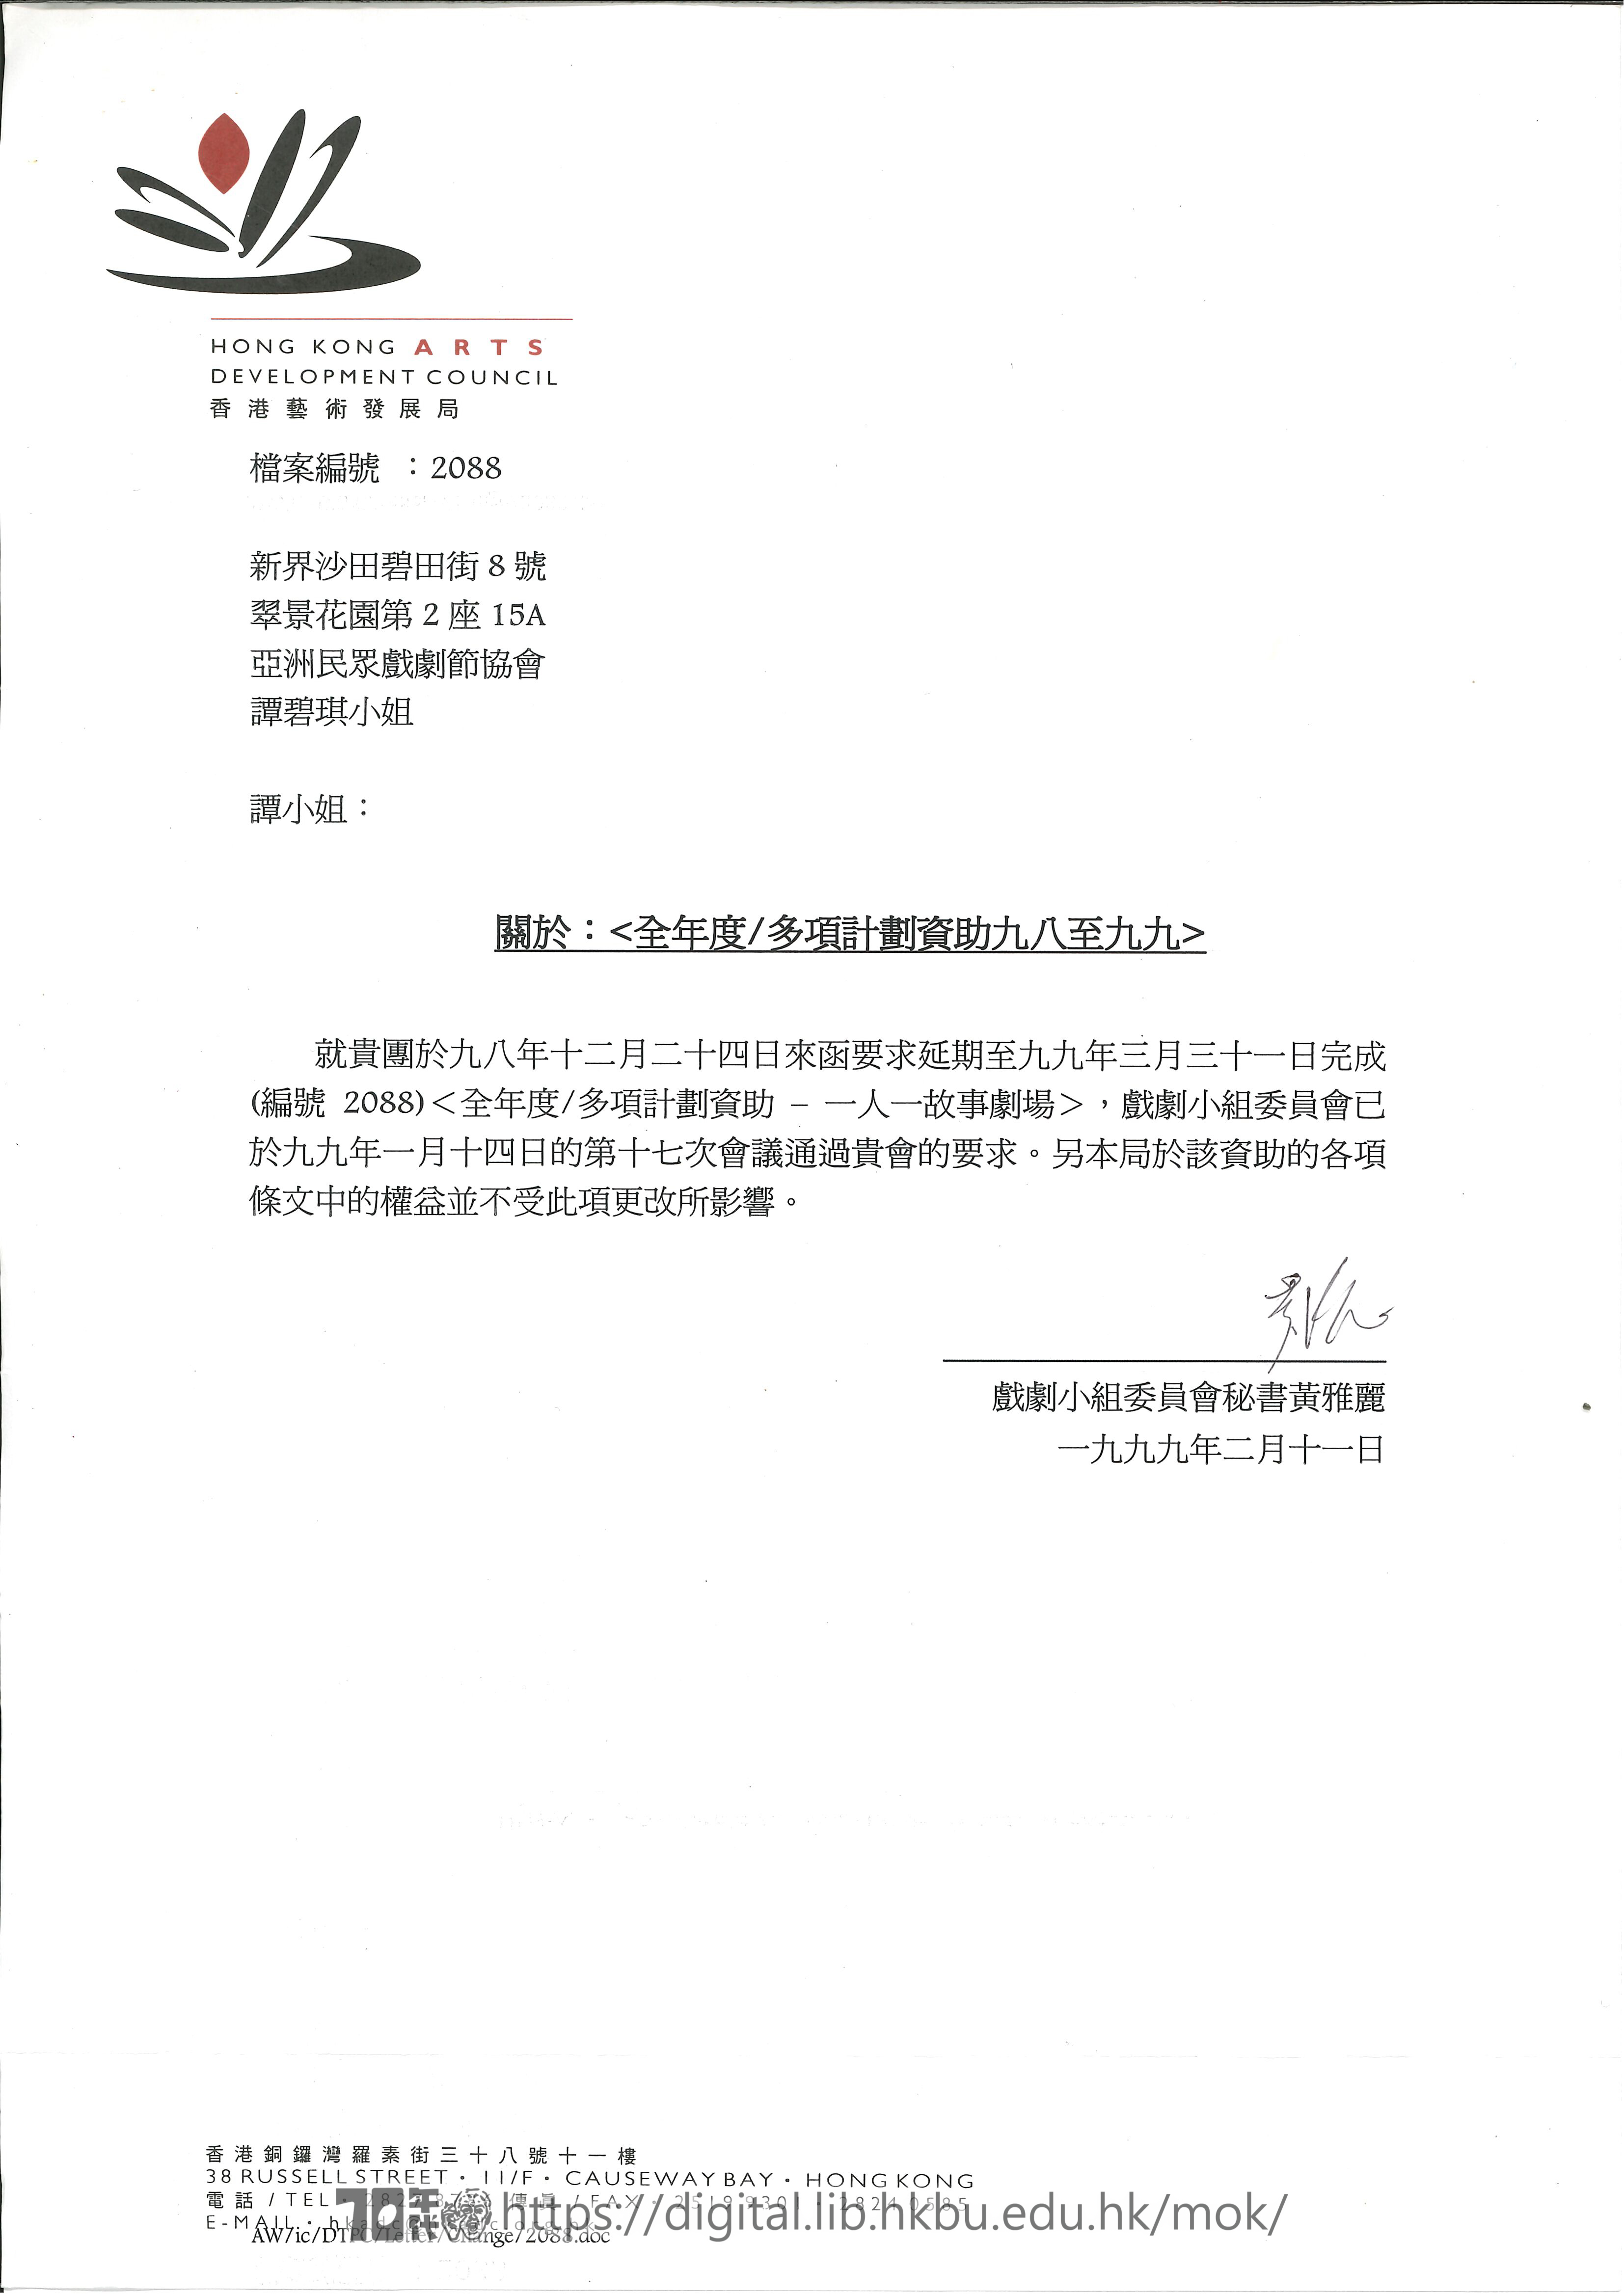 Community theatre  Reply from Hong Kong Arts Development Council  